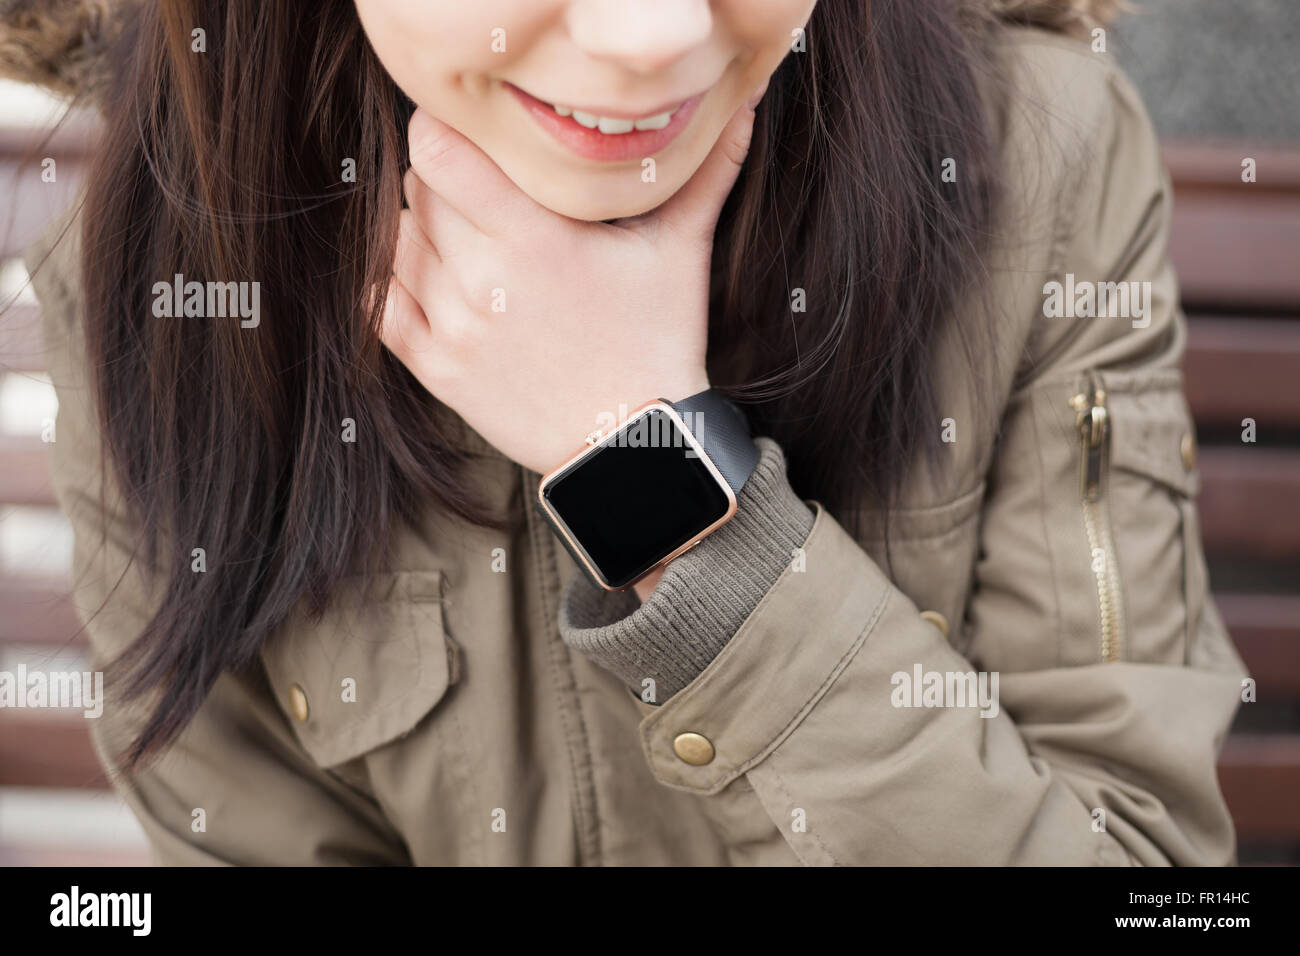 Smiling young girl wearing trendy smart wrist watch outdoors. New technology in real life scenario. Stock Photo